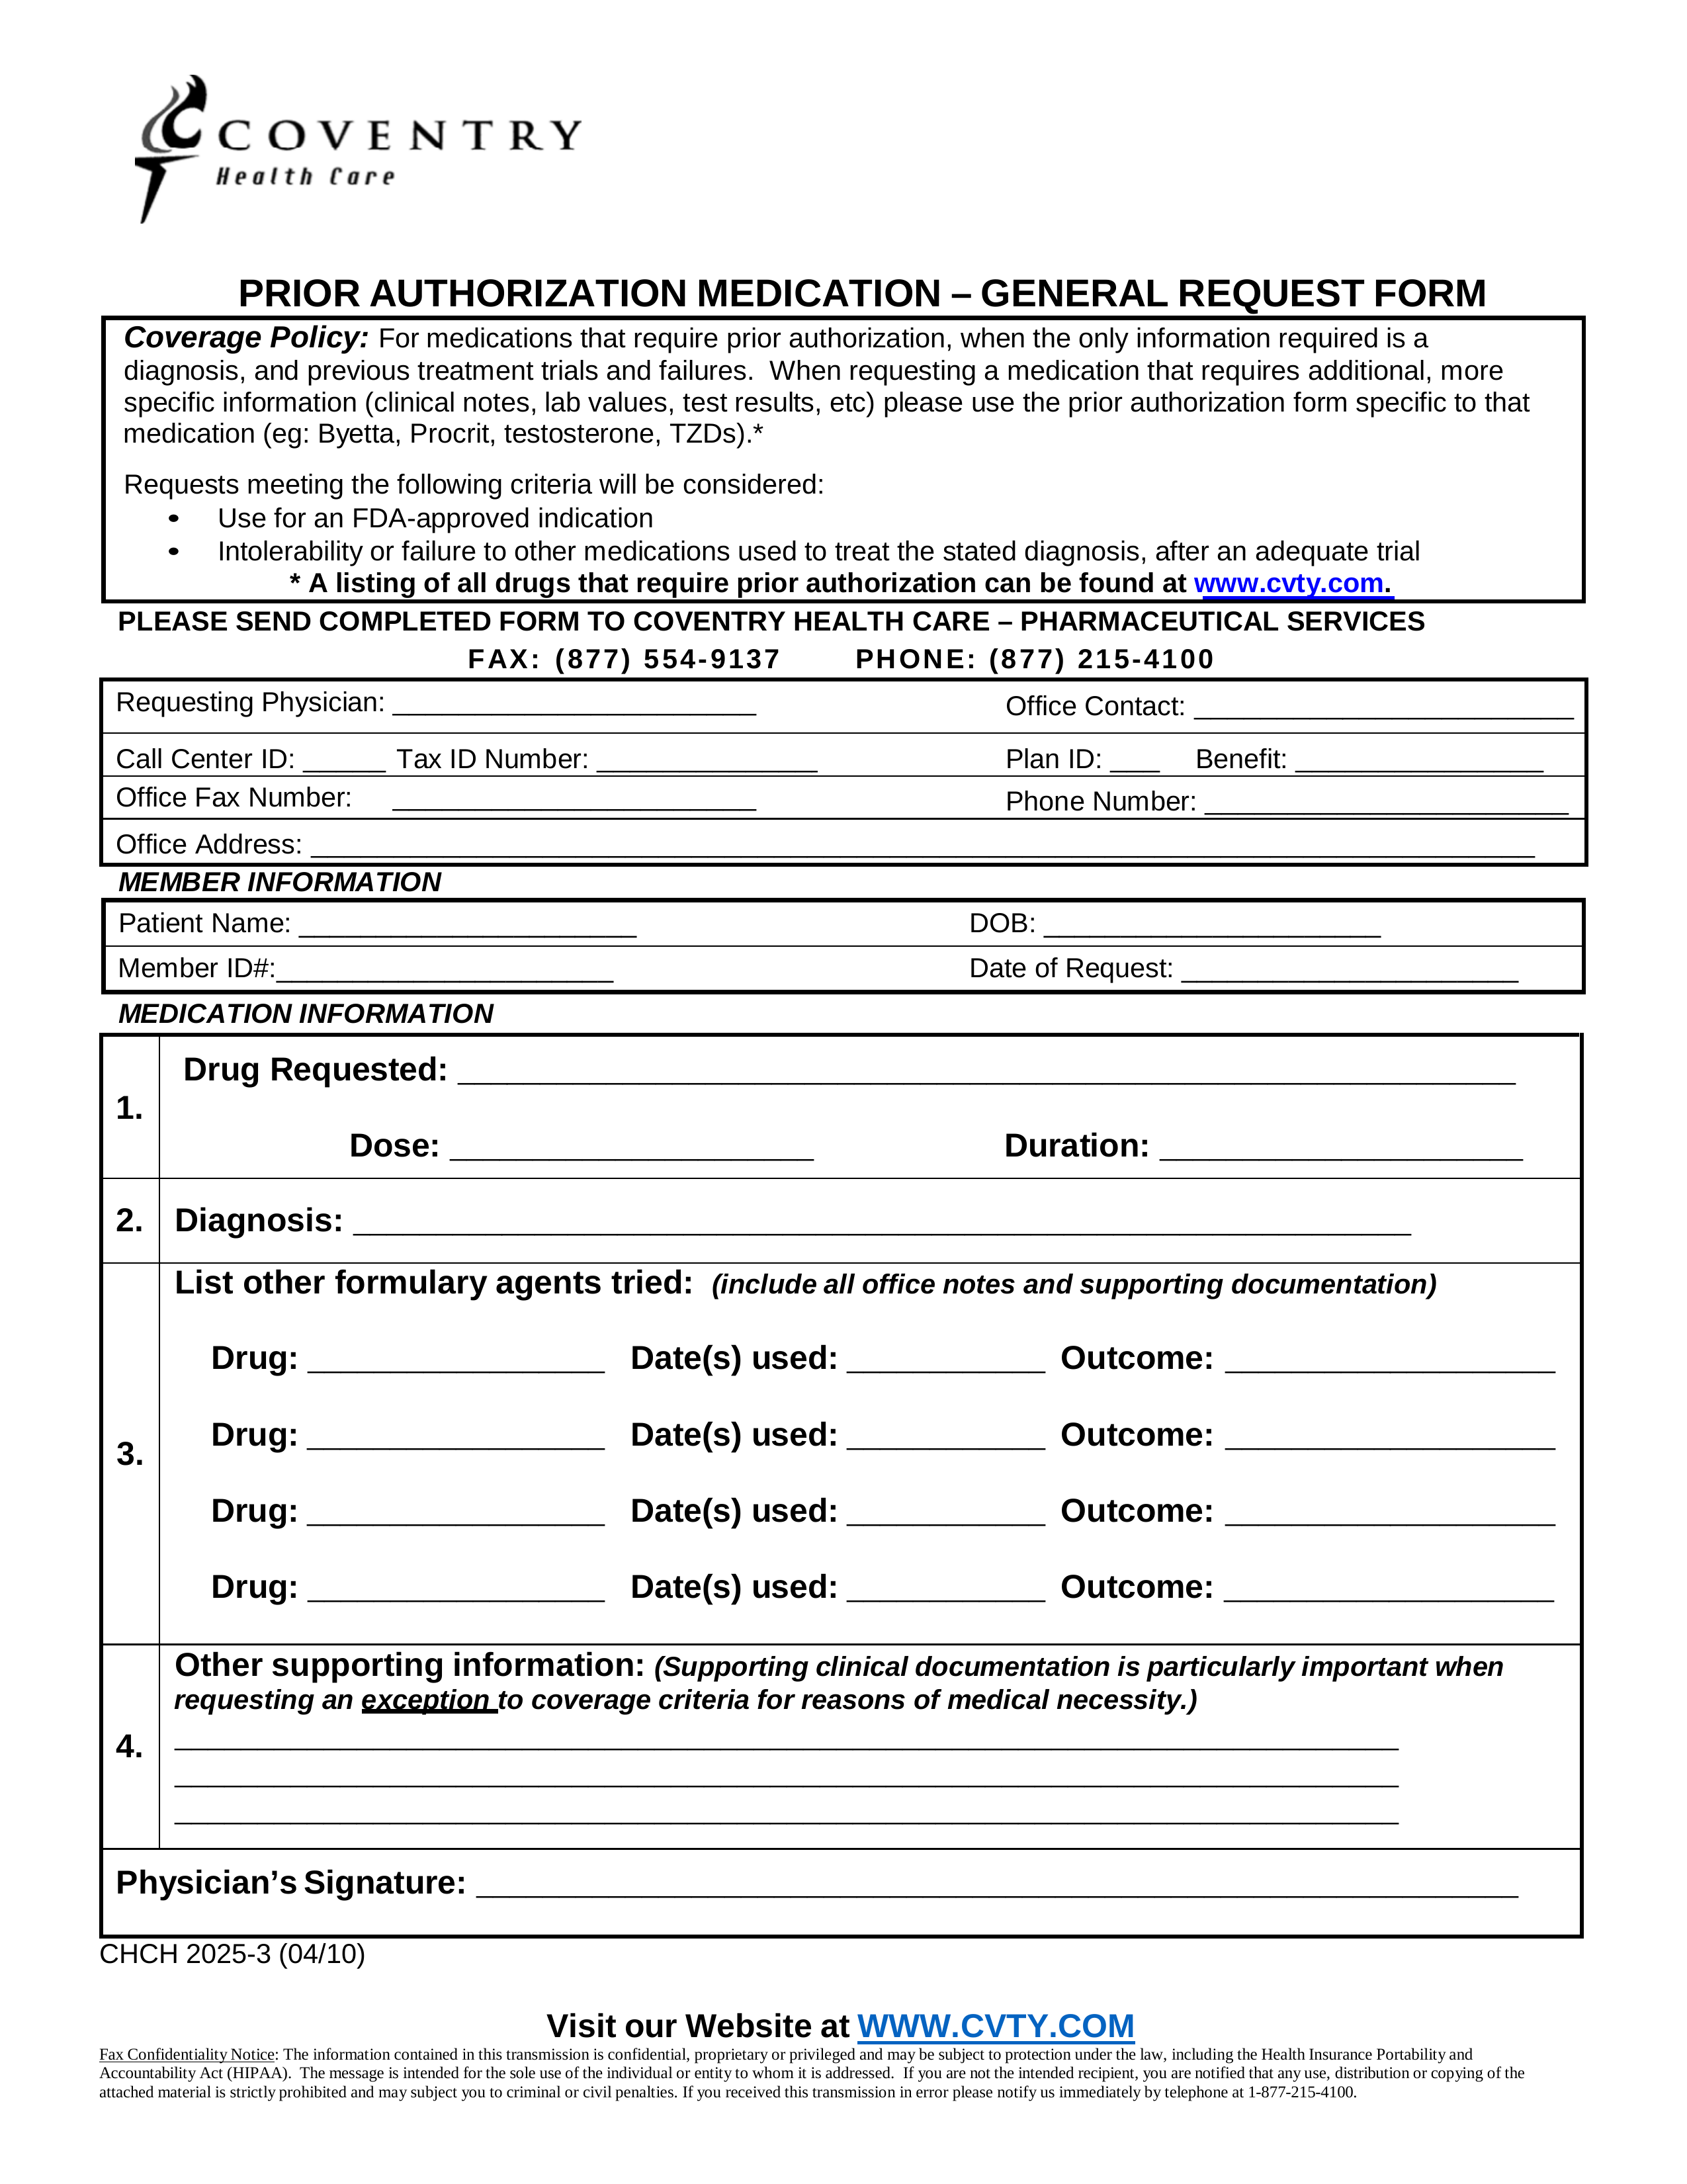 free-coventry-health-care-prior-rx-authorization-form-pdf-eforms